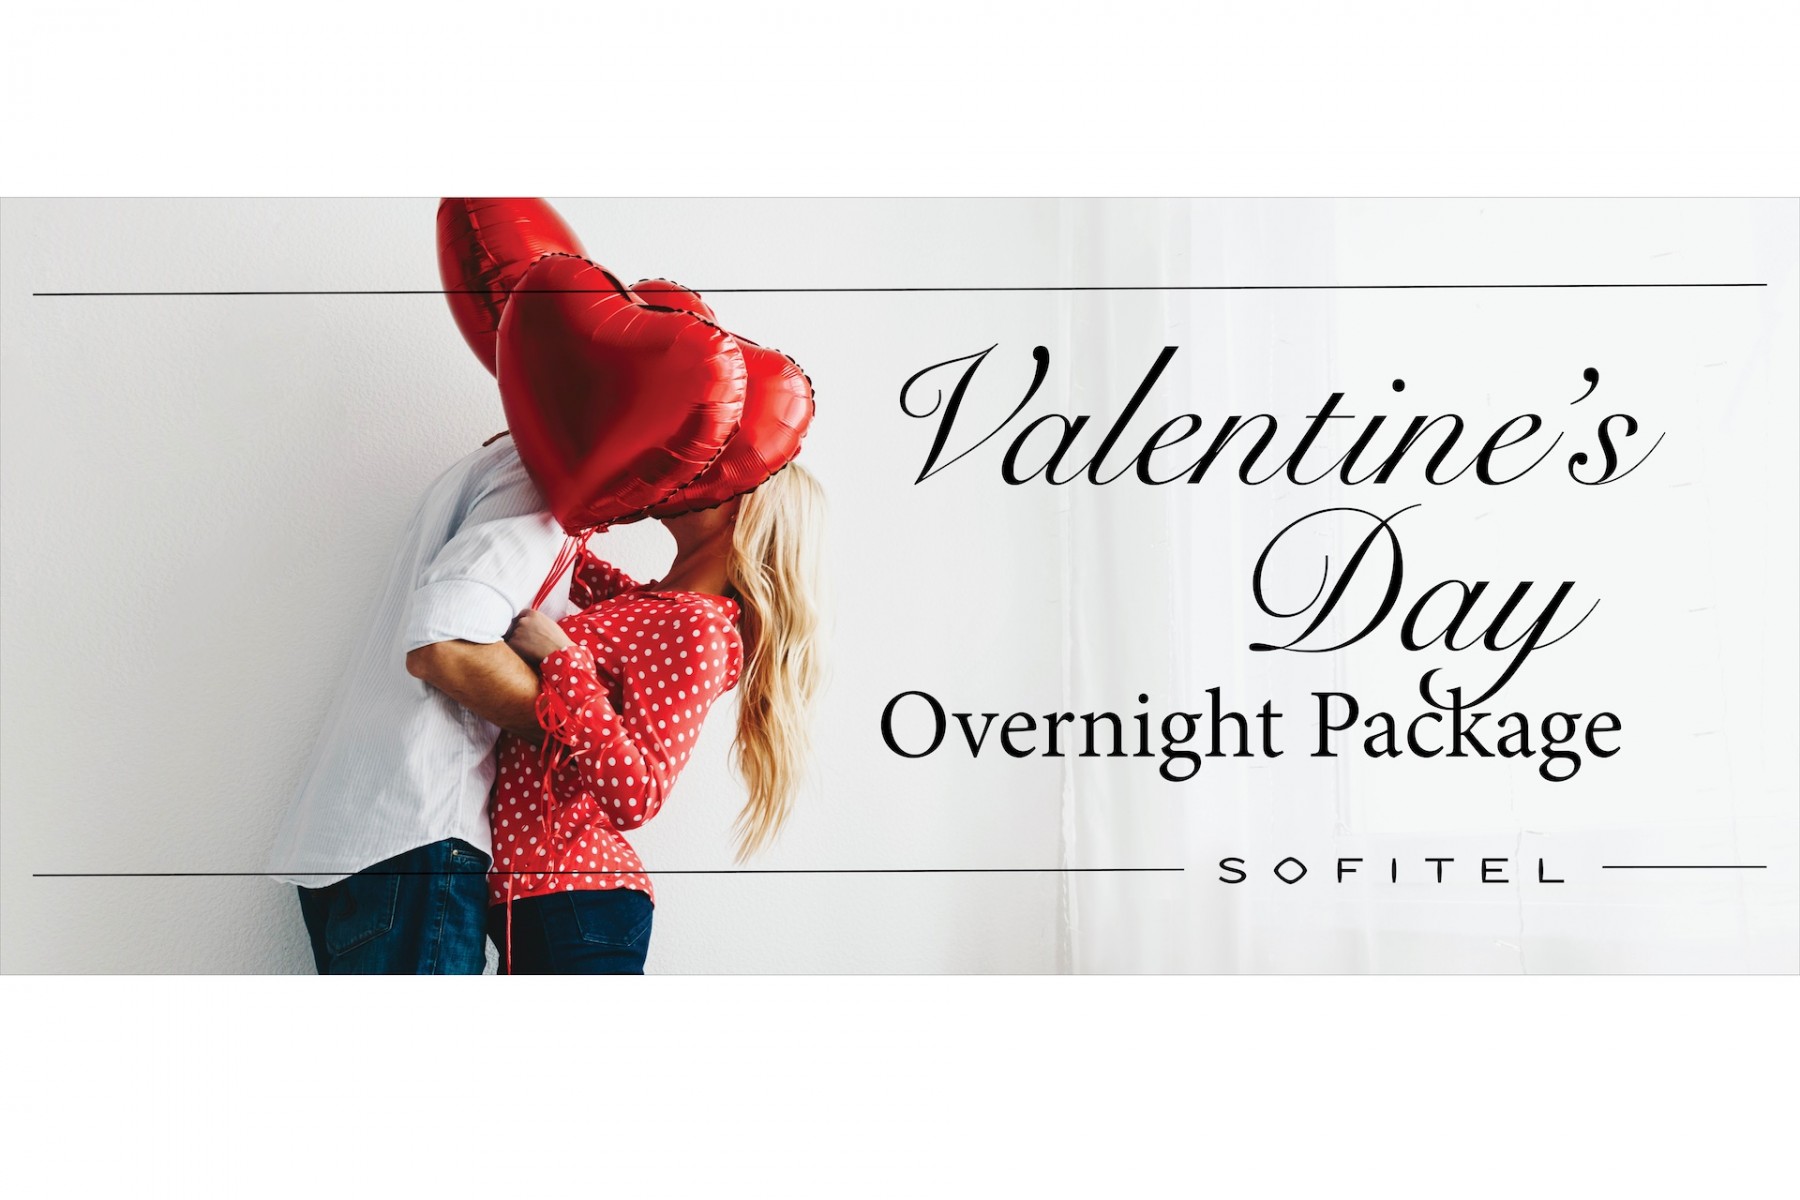 Photo of the hotel Sofitel Philadelphia at Rittenhouse Square: Valentines day overnight package copy 2